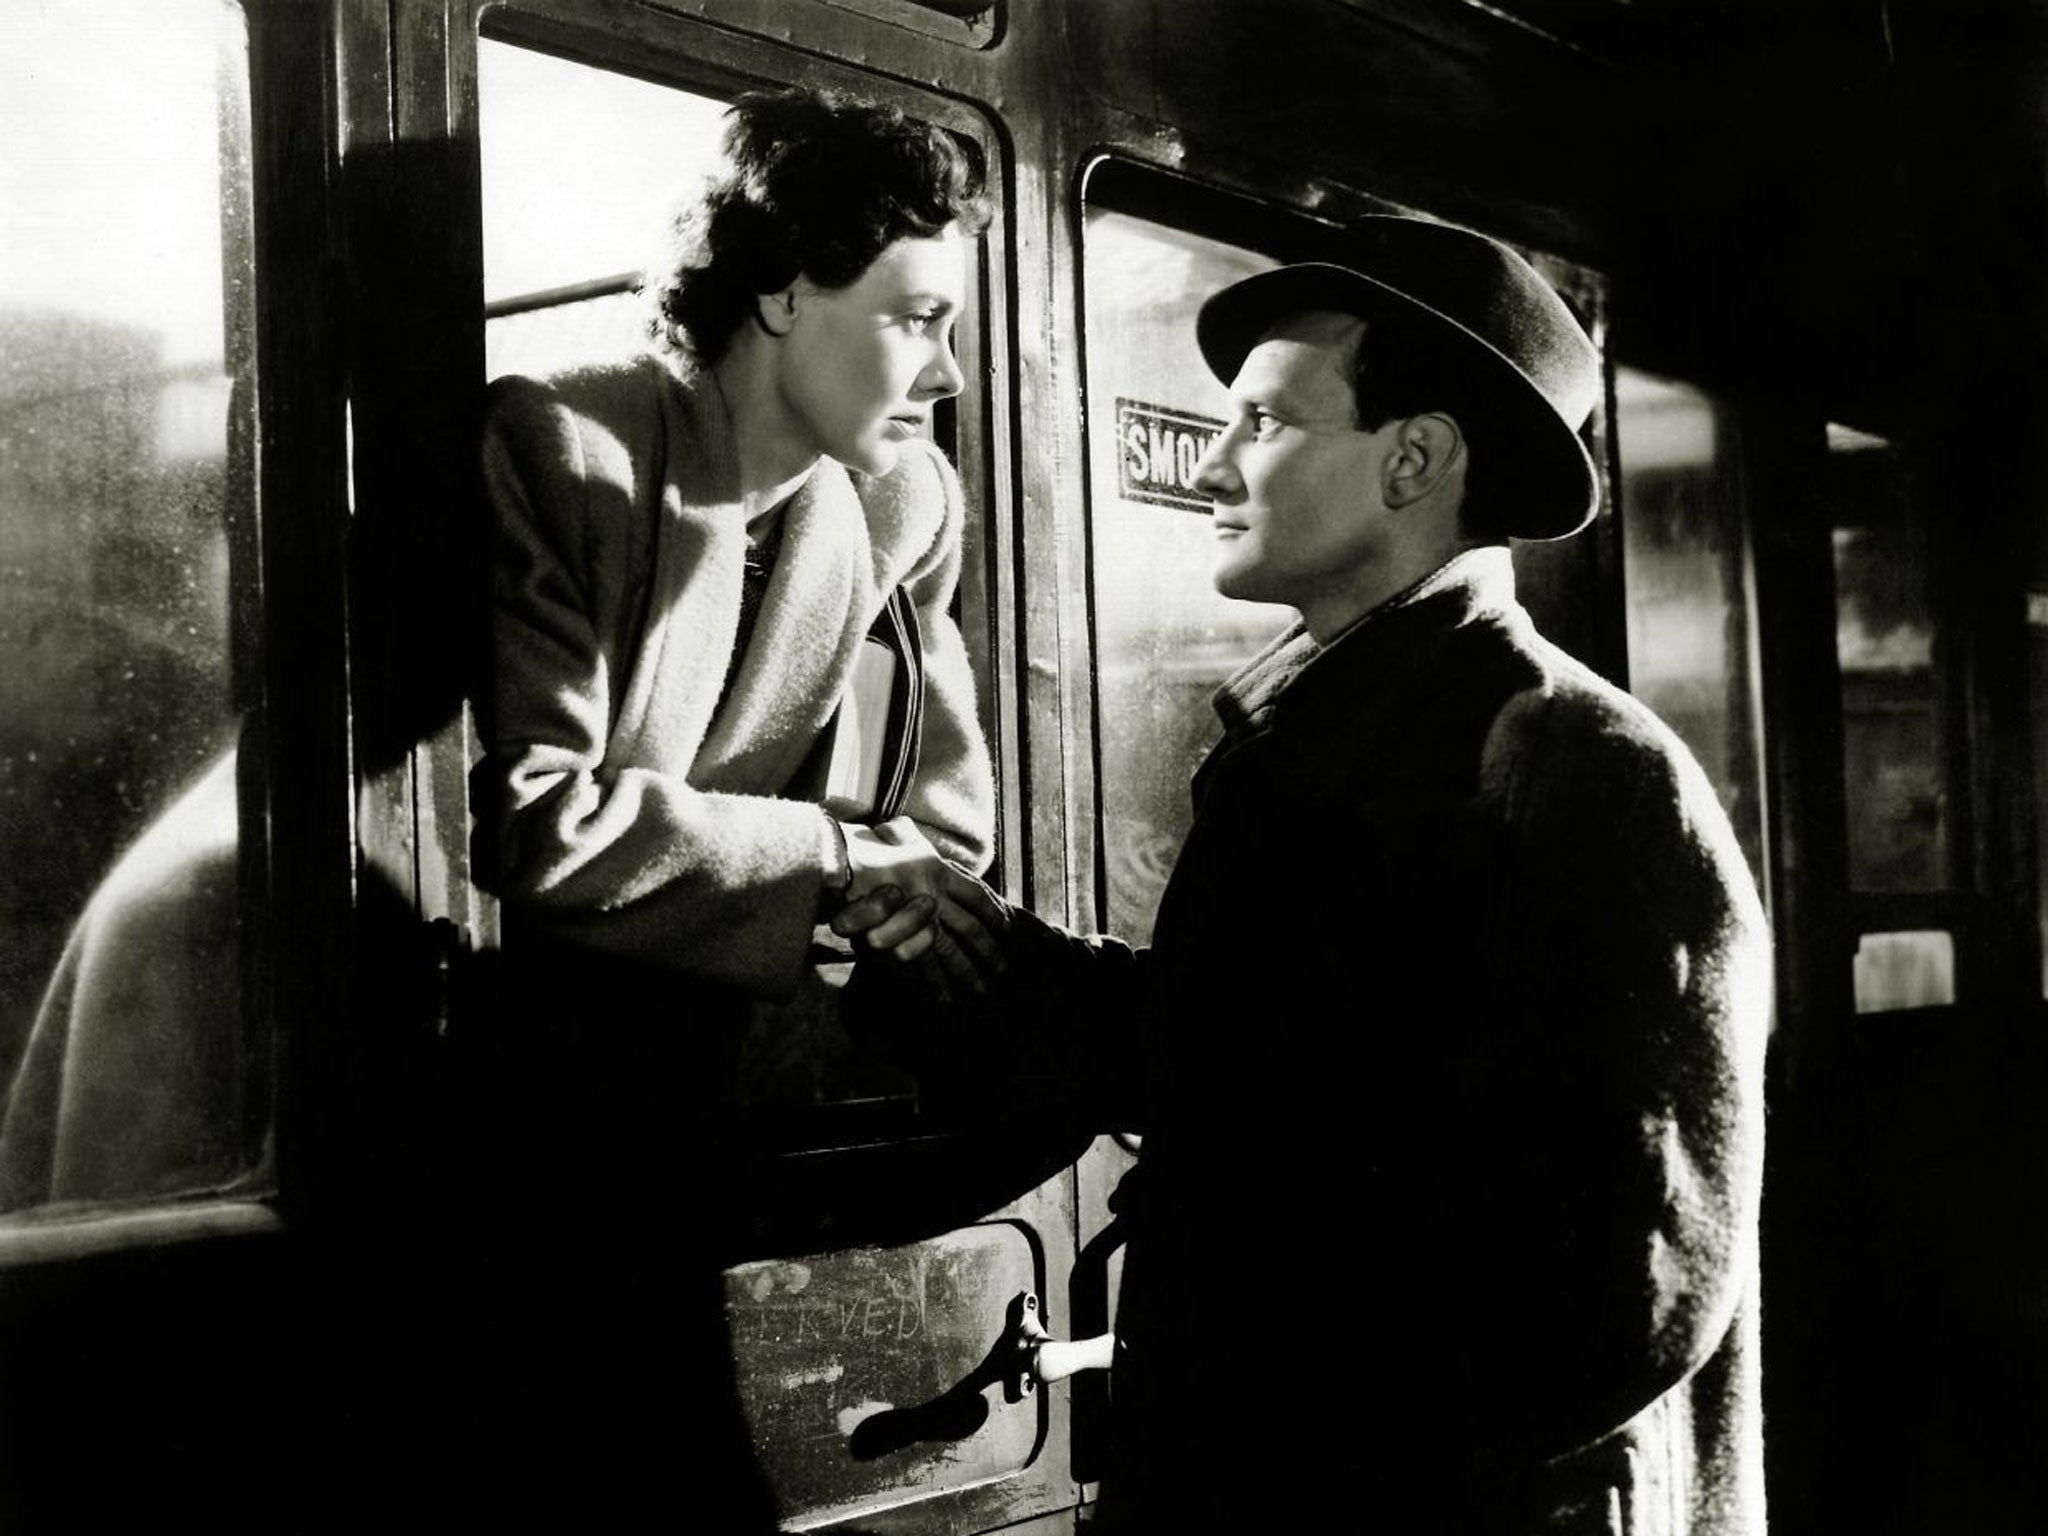 'Brief Encounter': Trains can work wonders for the libido